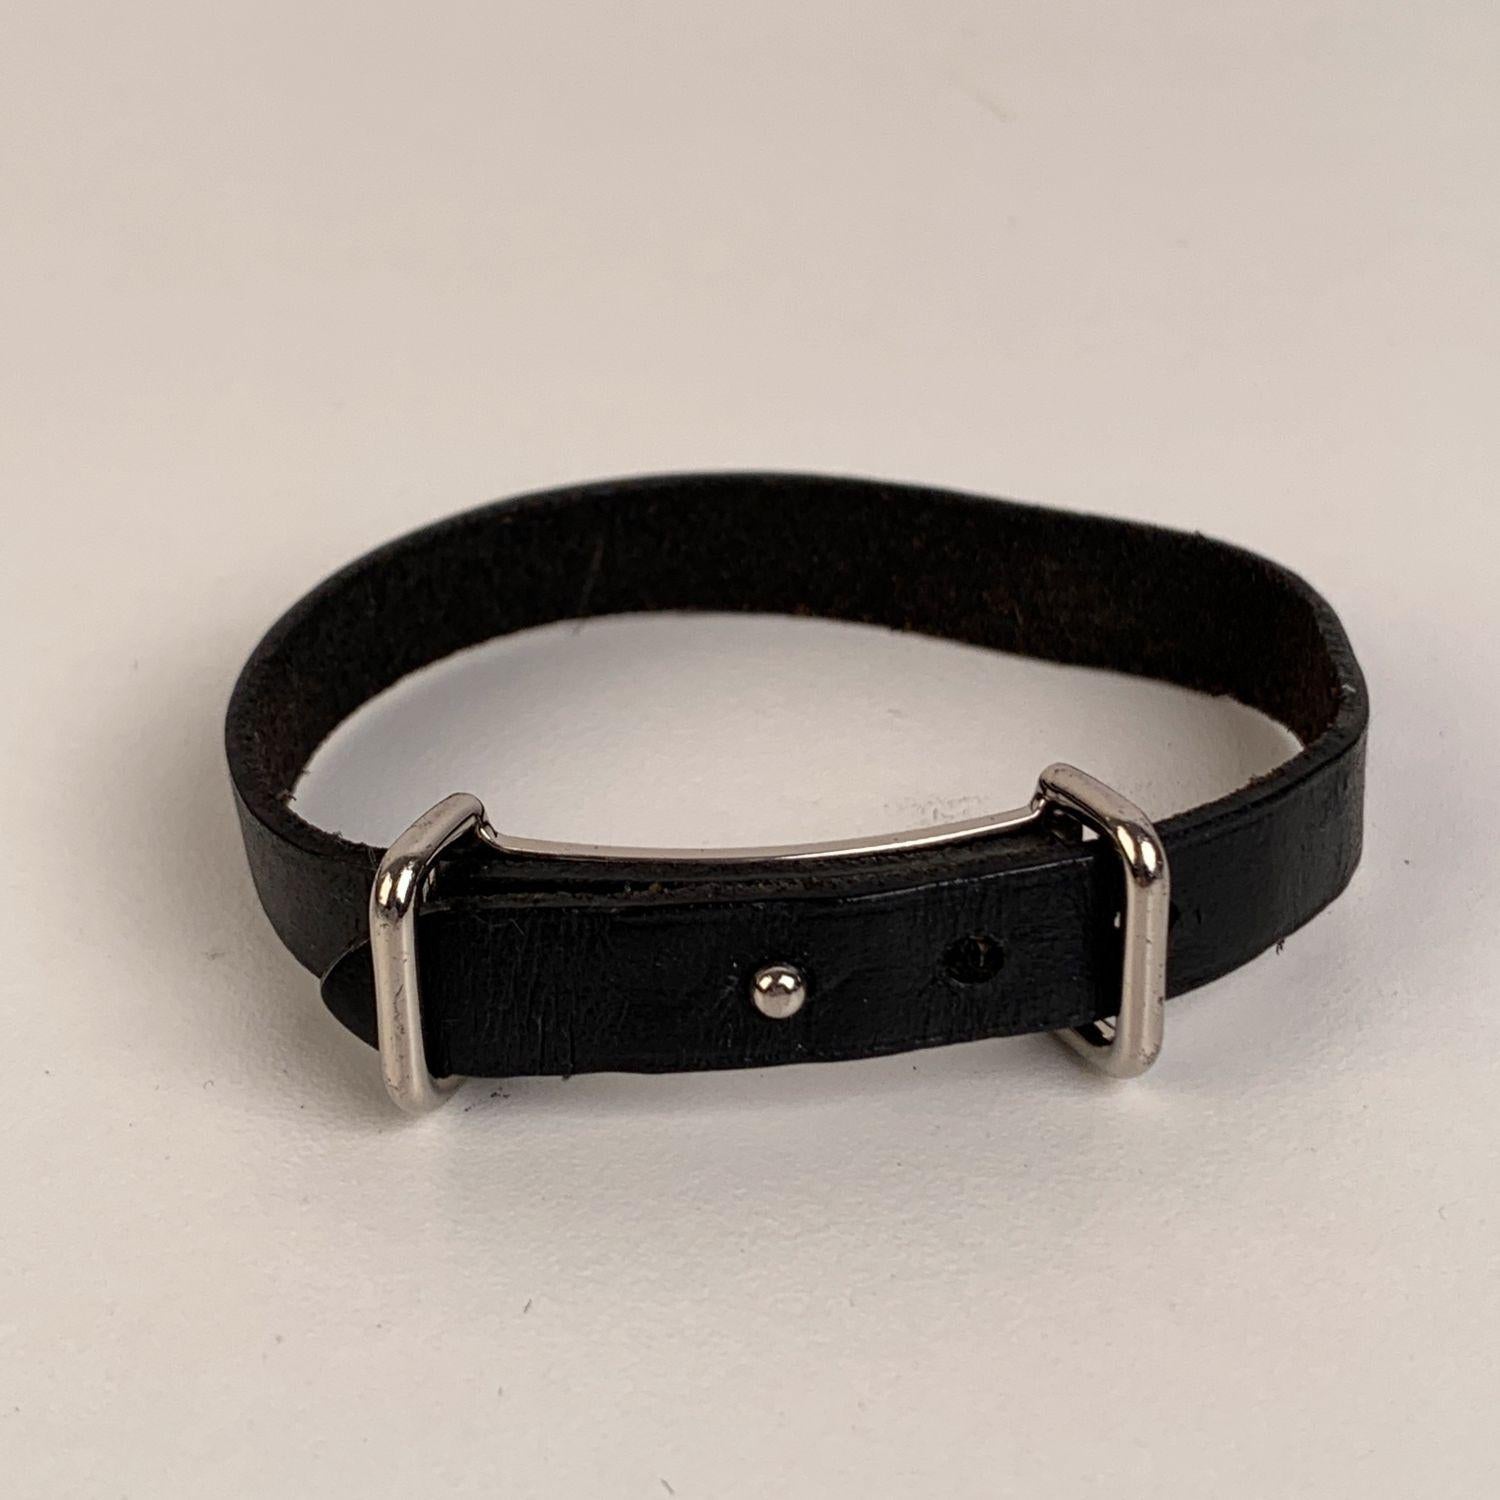 Vintage Hermes leather adjustable bracelet in black color. Palladium buckle.3 holes adjustment. For wrists up to 7 inches - 17,7 cm in circumference.. Total lenght of the strap: 9 inches - 22,8 cm. Signed 'Hermes Paris' on the back. 'Hermes'